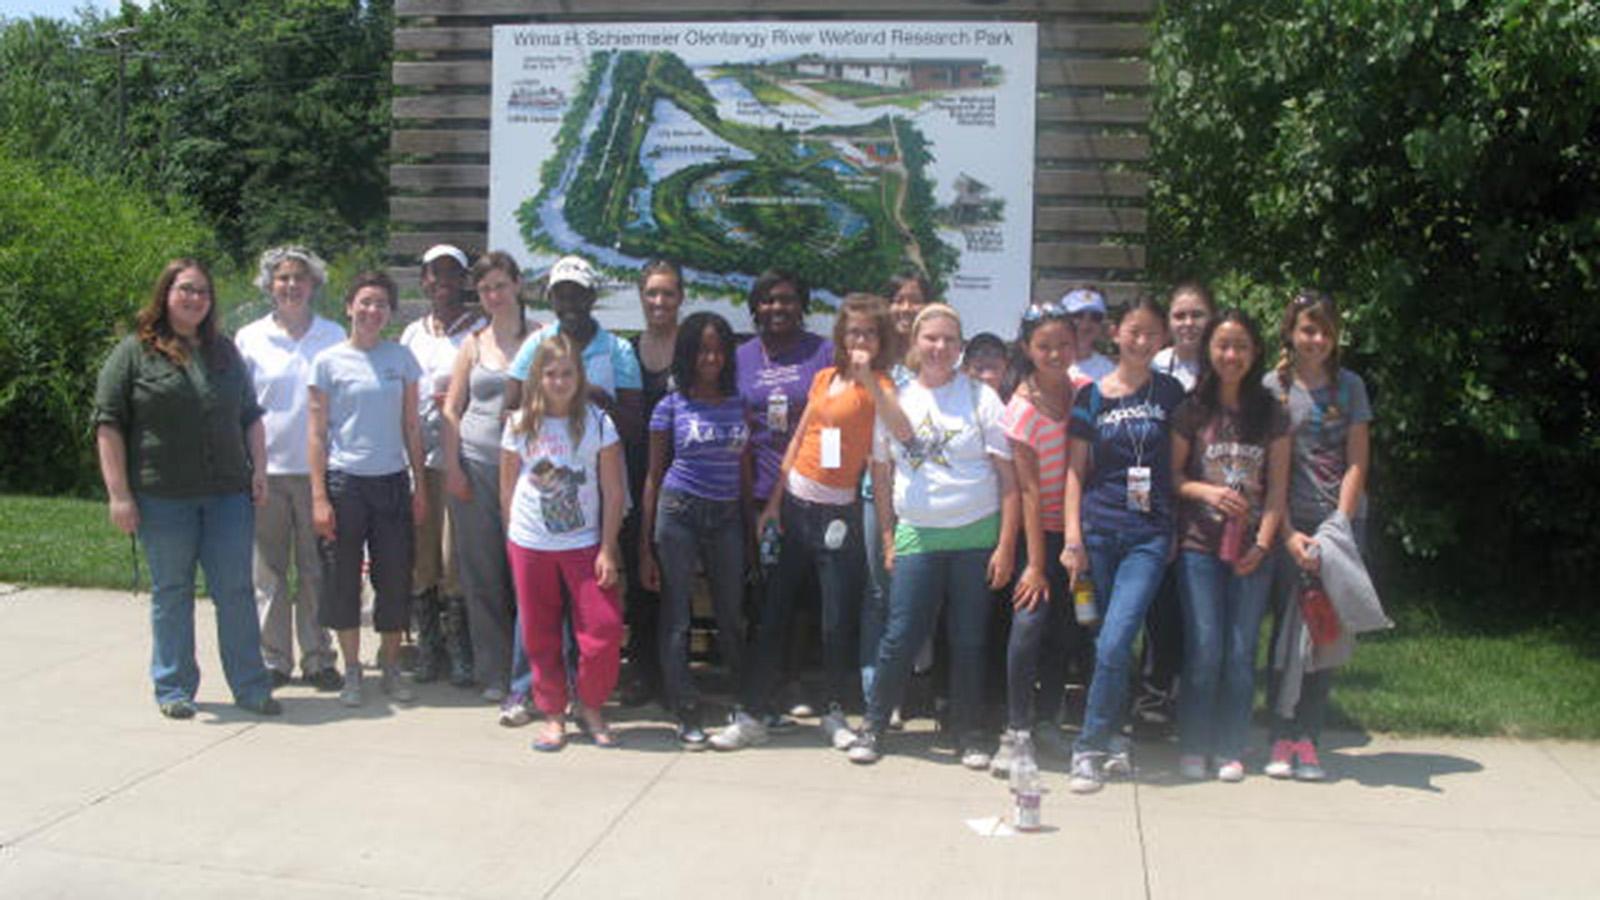 group photo of students and mentors at the Olentangy River Wetland Research Park